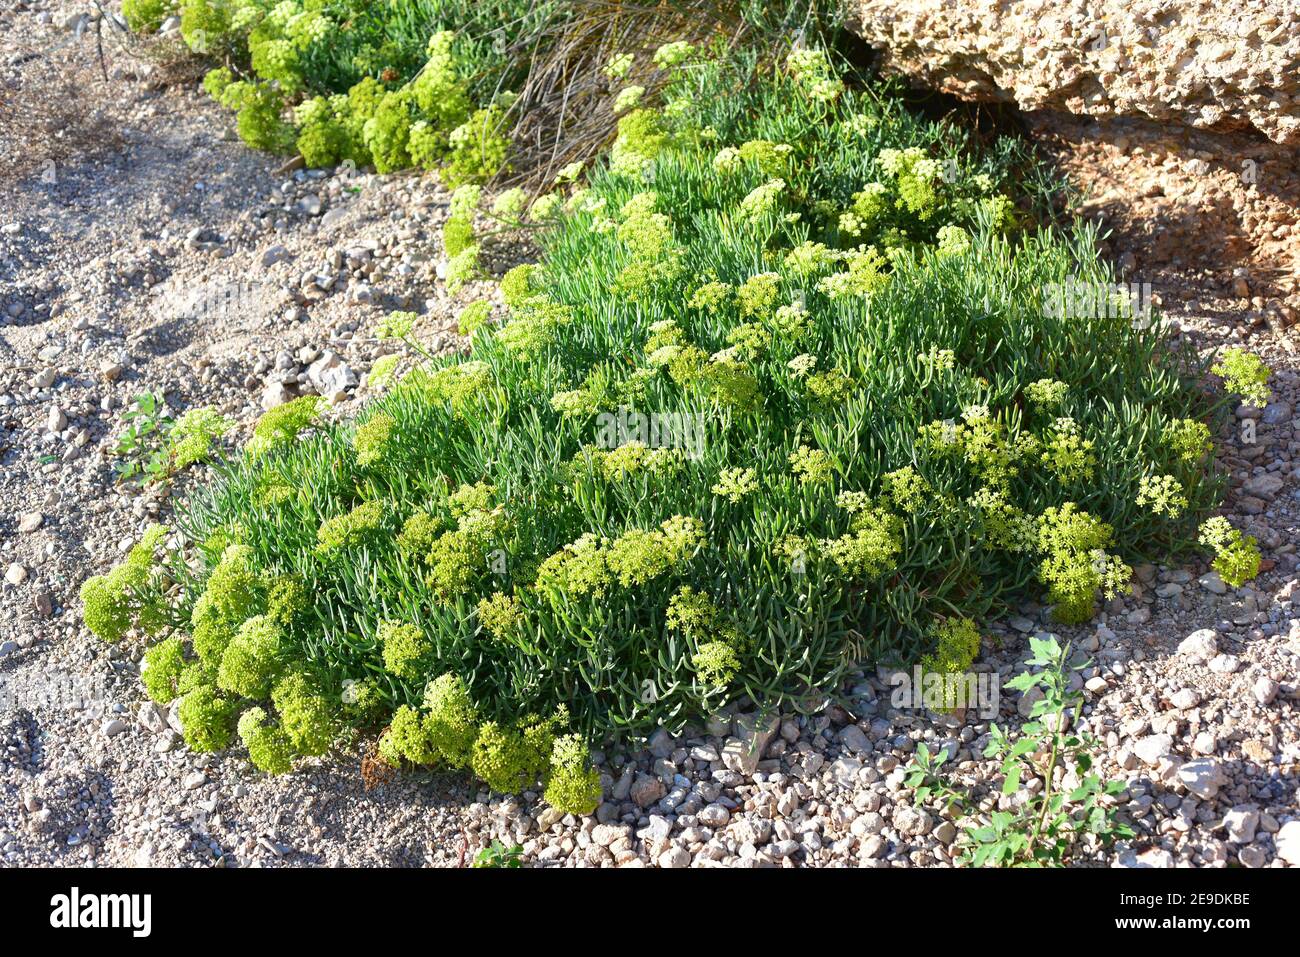 Sea fennel or rock samphire (Crithmum maritimum) is an edible perennial plant native to Europe coasts and northern Africa. This photo was taken in Stock Photo